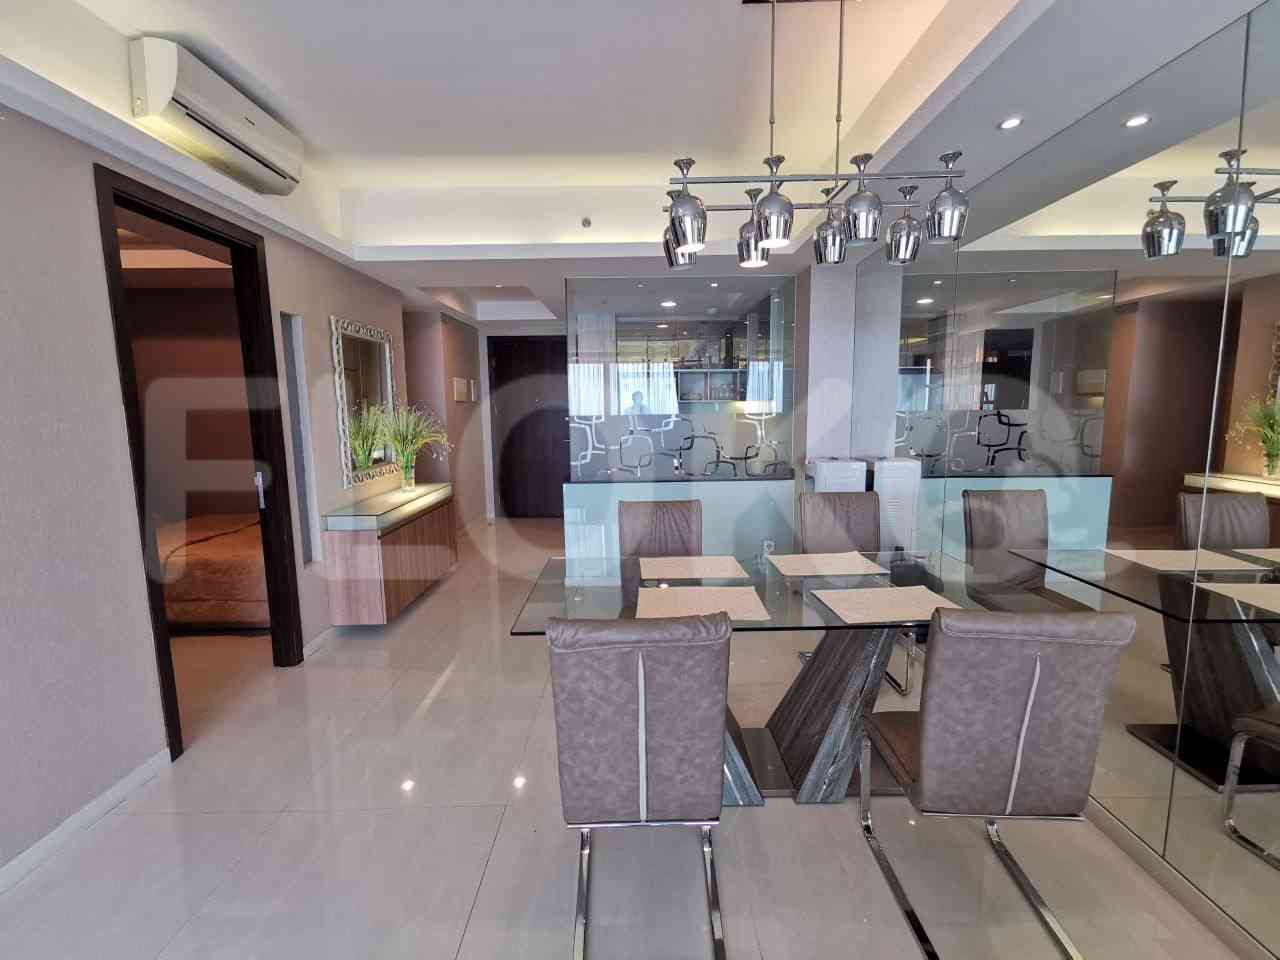 2 Bedroom on 26th Floor for Rent in Kemang Village Residence - fkea2f 1